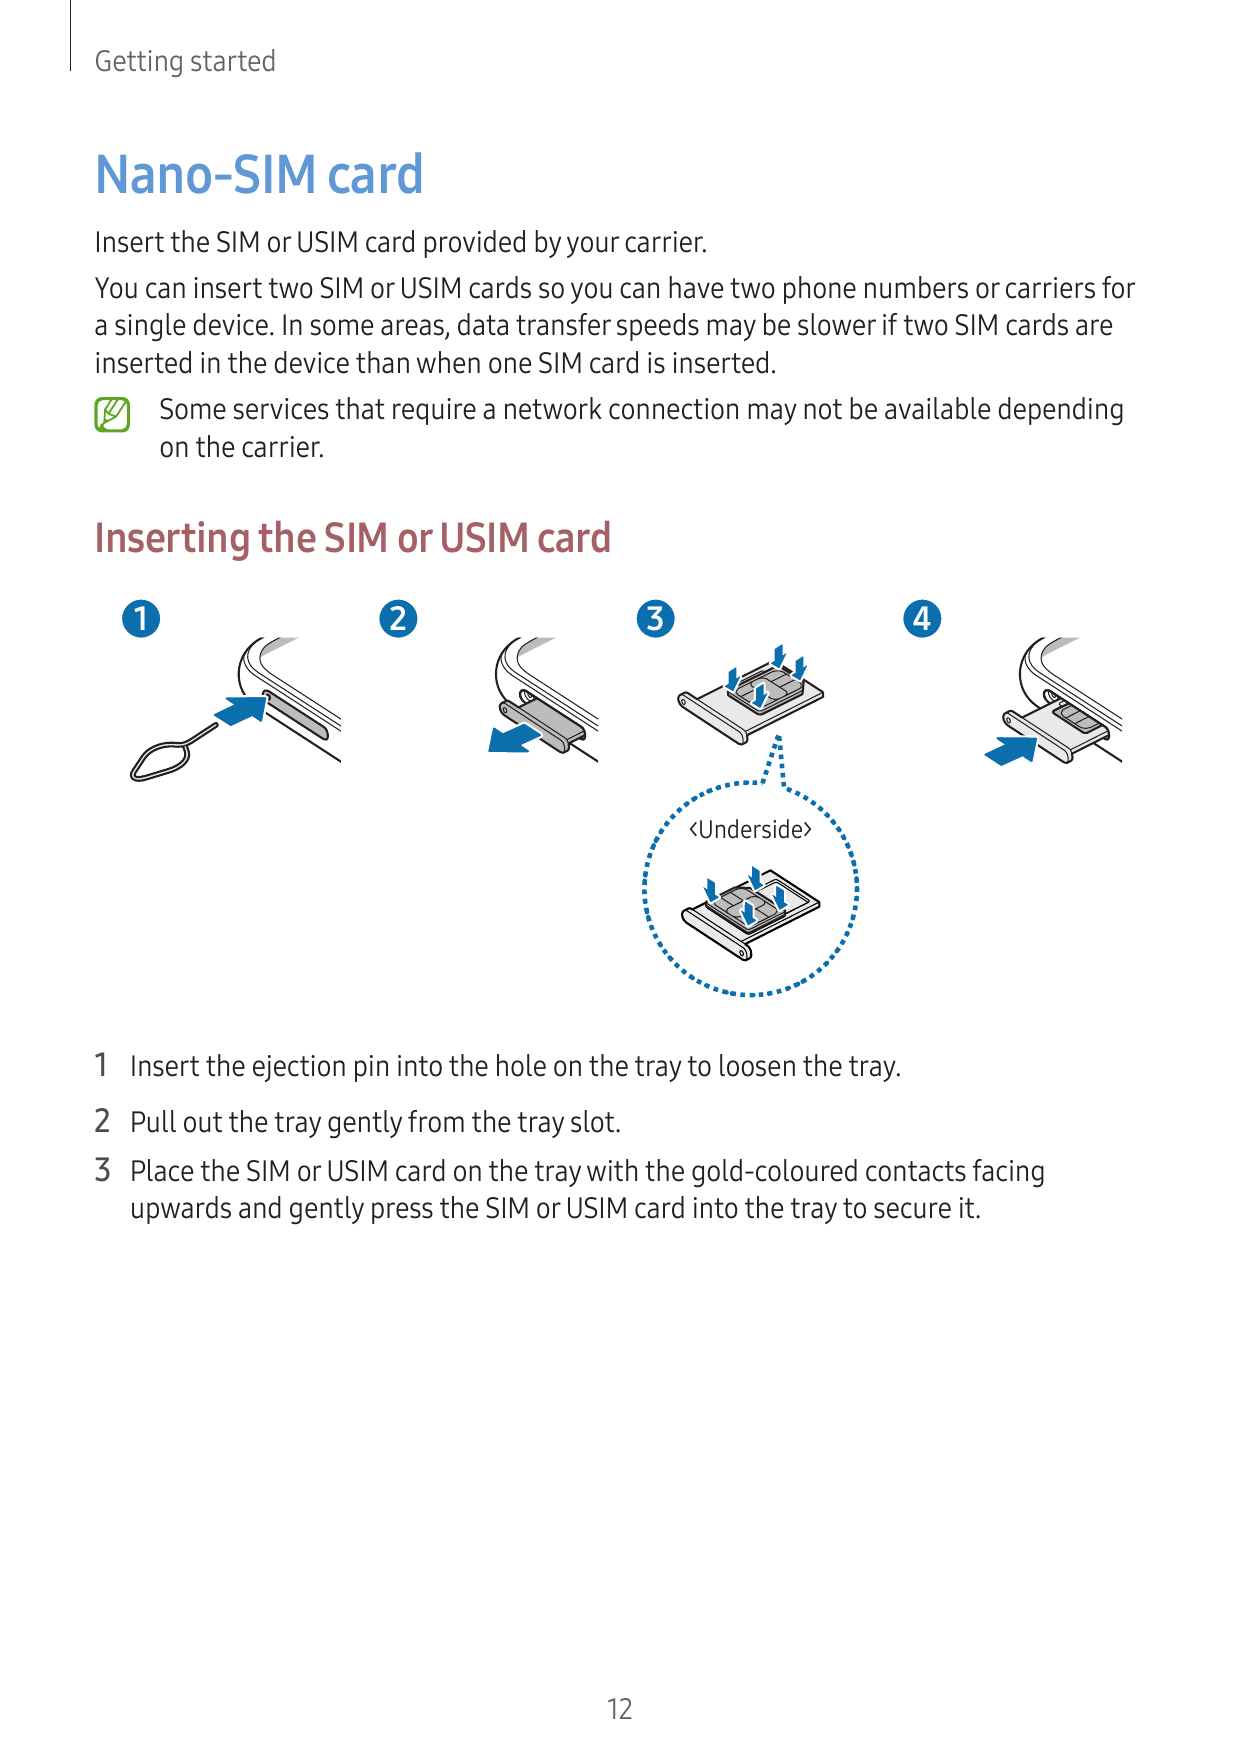 Getting startedNano-SIM cardInsert the SIM or USIM card provided by your carrier.You can insert two SIM or USIM cards so you can